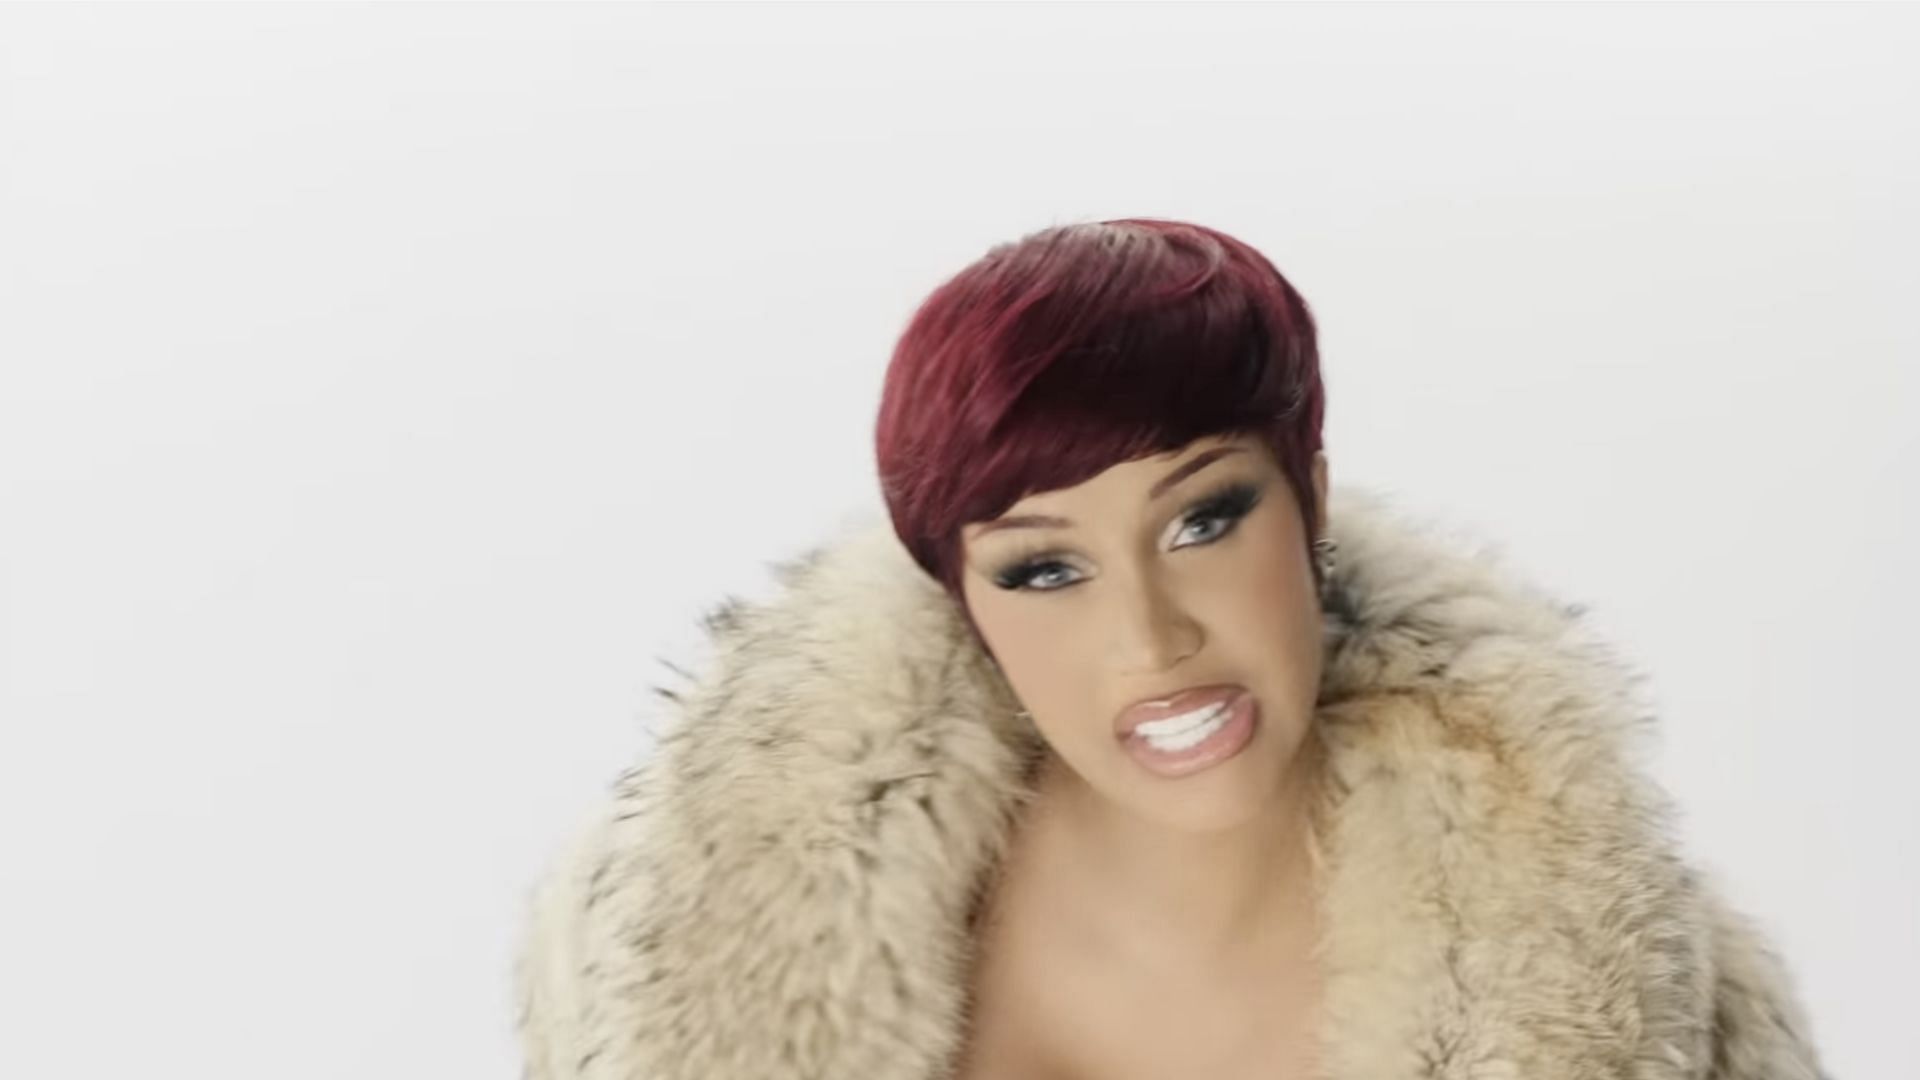 Cardi B performing in the music video for her new single &#039;Enough (Miami)&#039; which released on March 15, 2024 (Image via YouTube/@cardib)